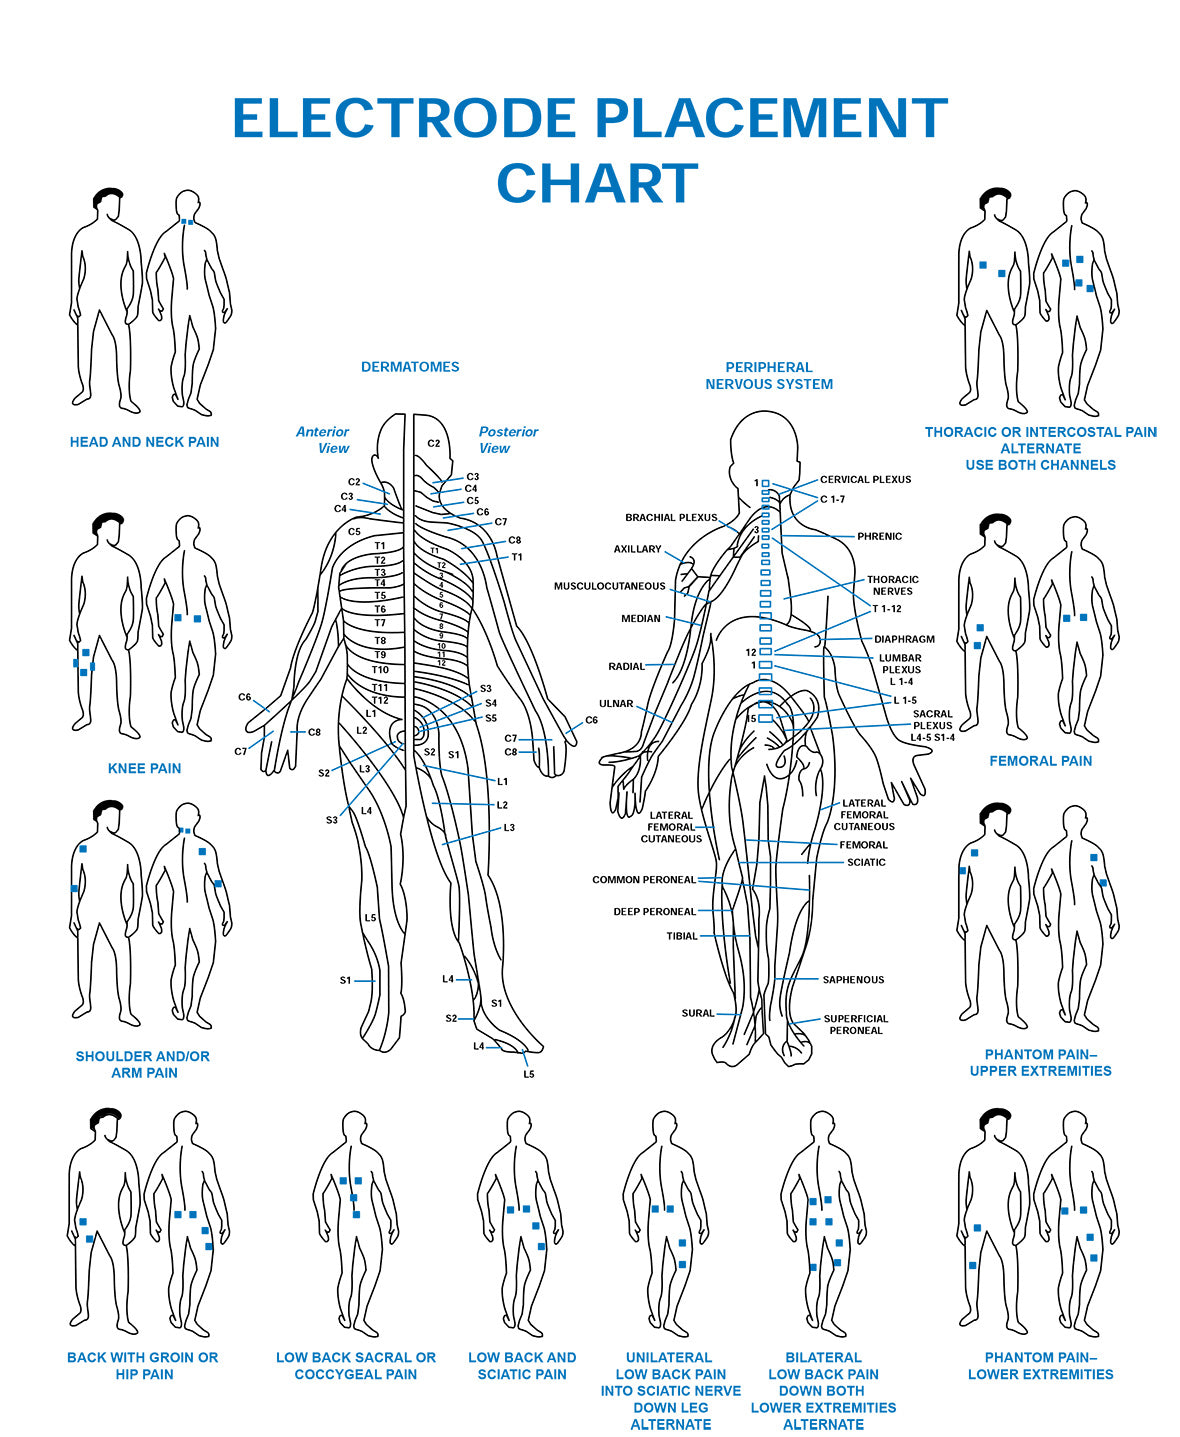 Electrode Placement Chart